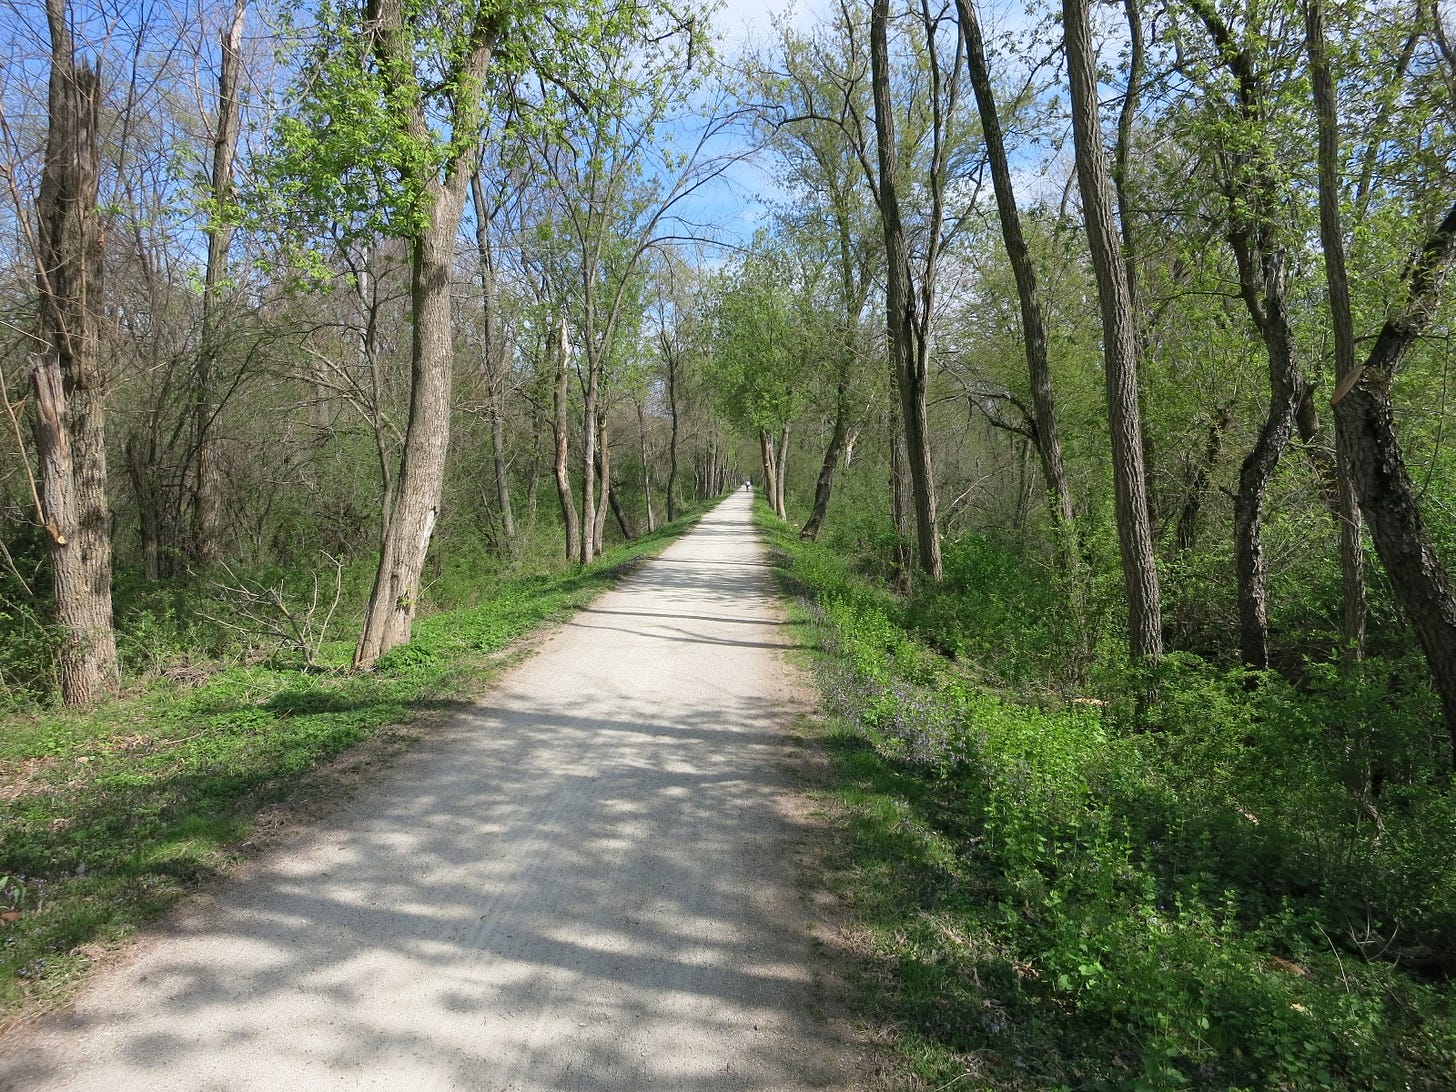 A wide dirt path runs through a green forest with many trees on both sides.